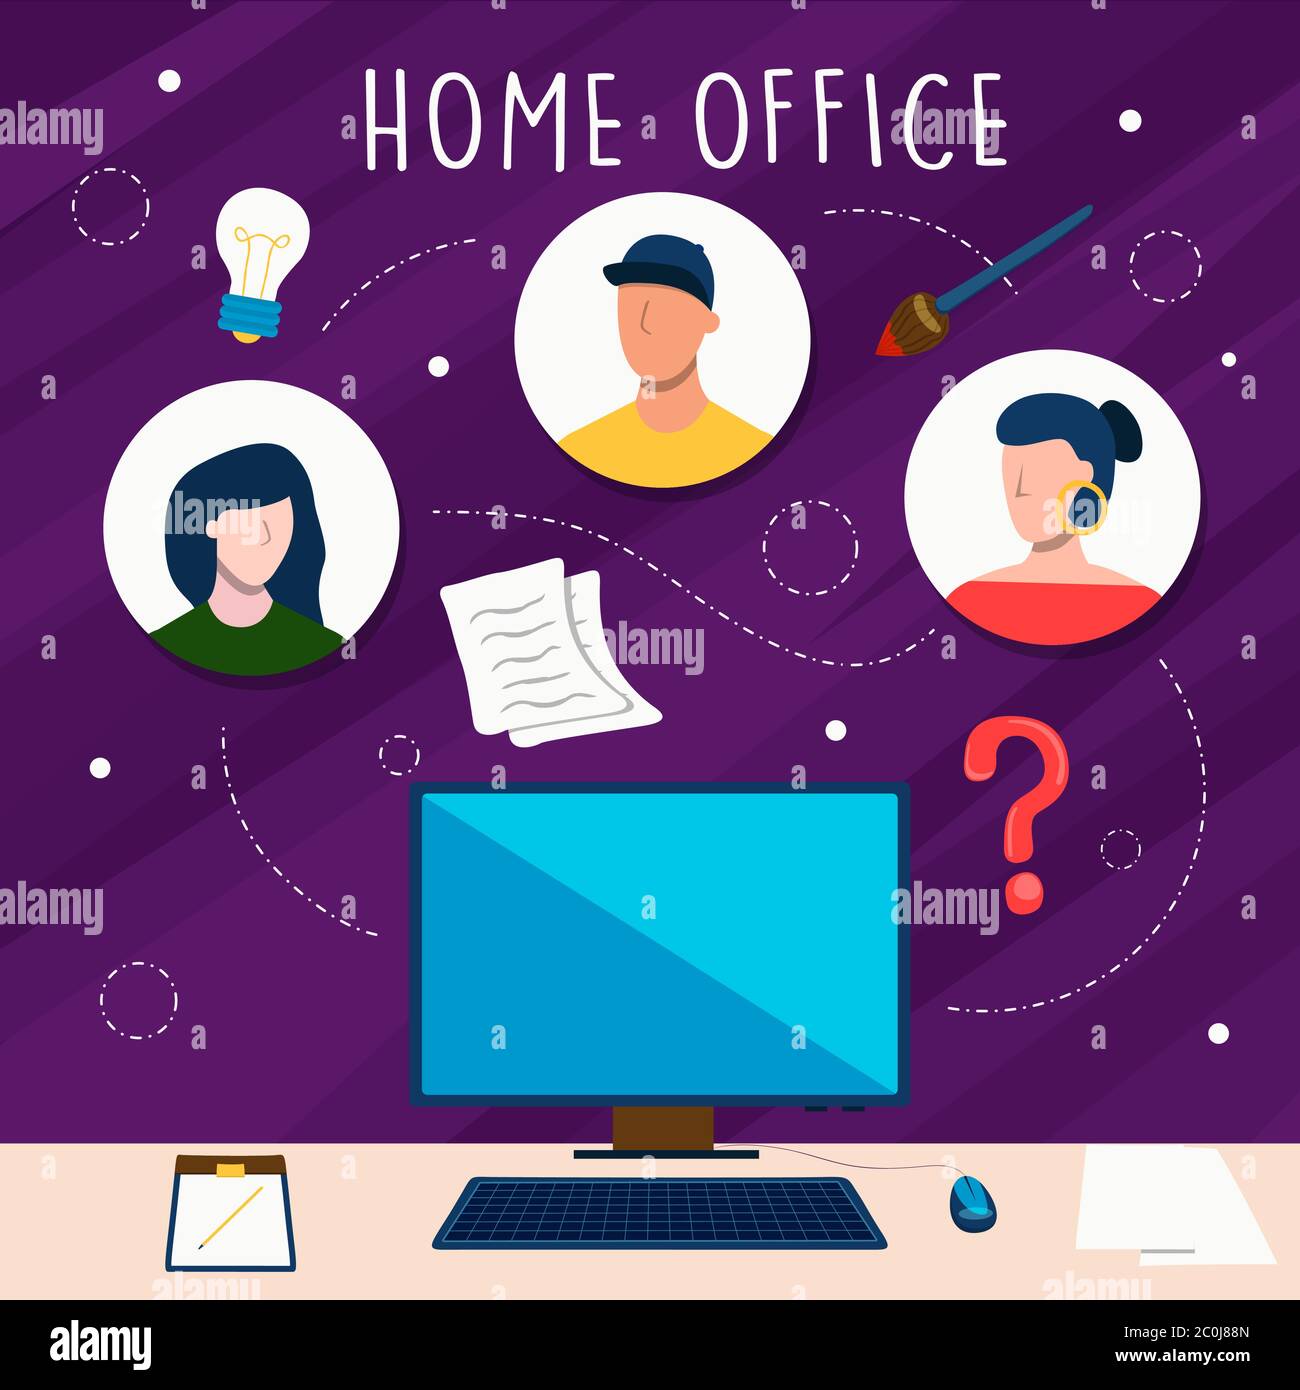 Home office flat cartoon illustration for online business job or work team meeting in quarantine times. Computer desk house workplace with connected p Stock Vector